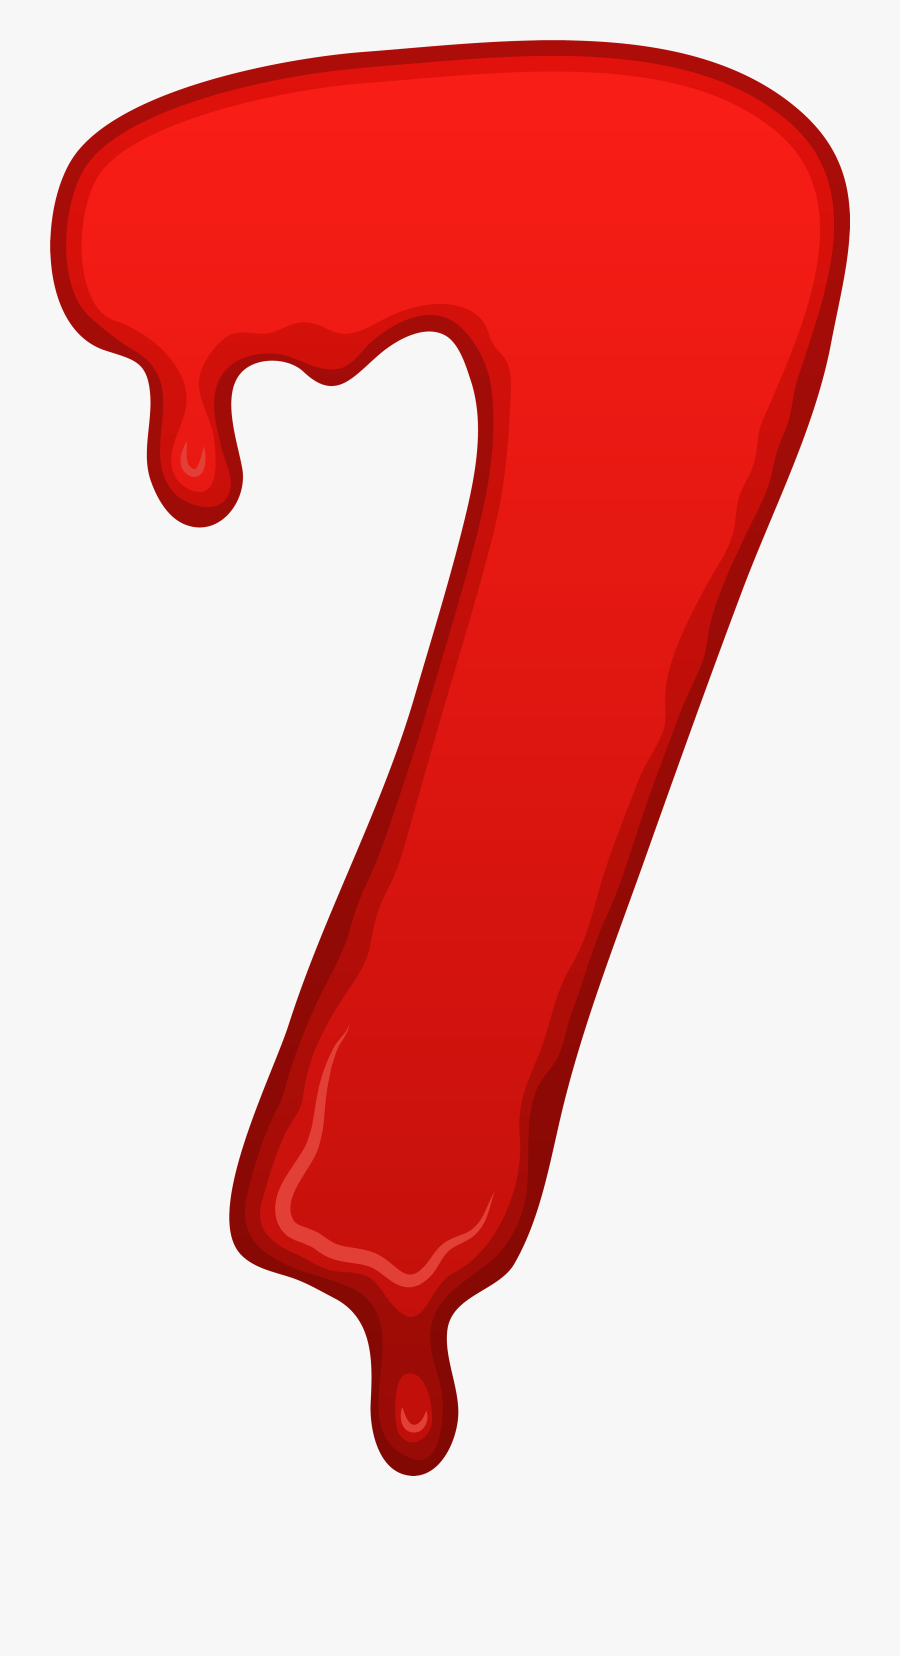 Bloody Numbers Png - Bloody Number 7 Png, Transparent Clipart